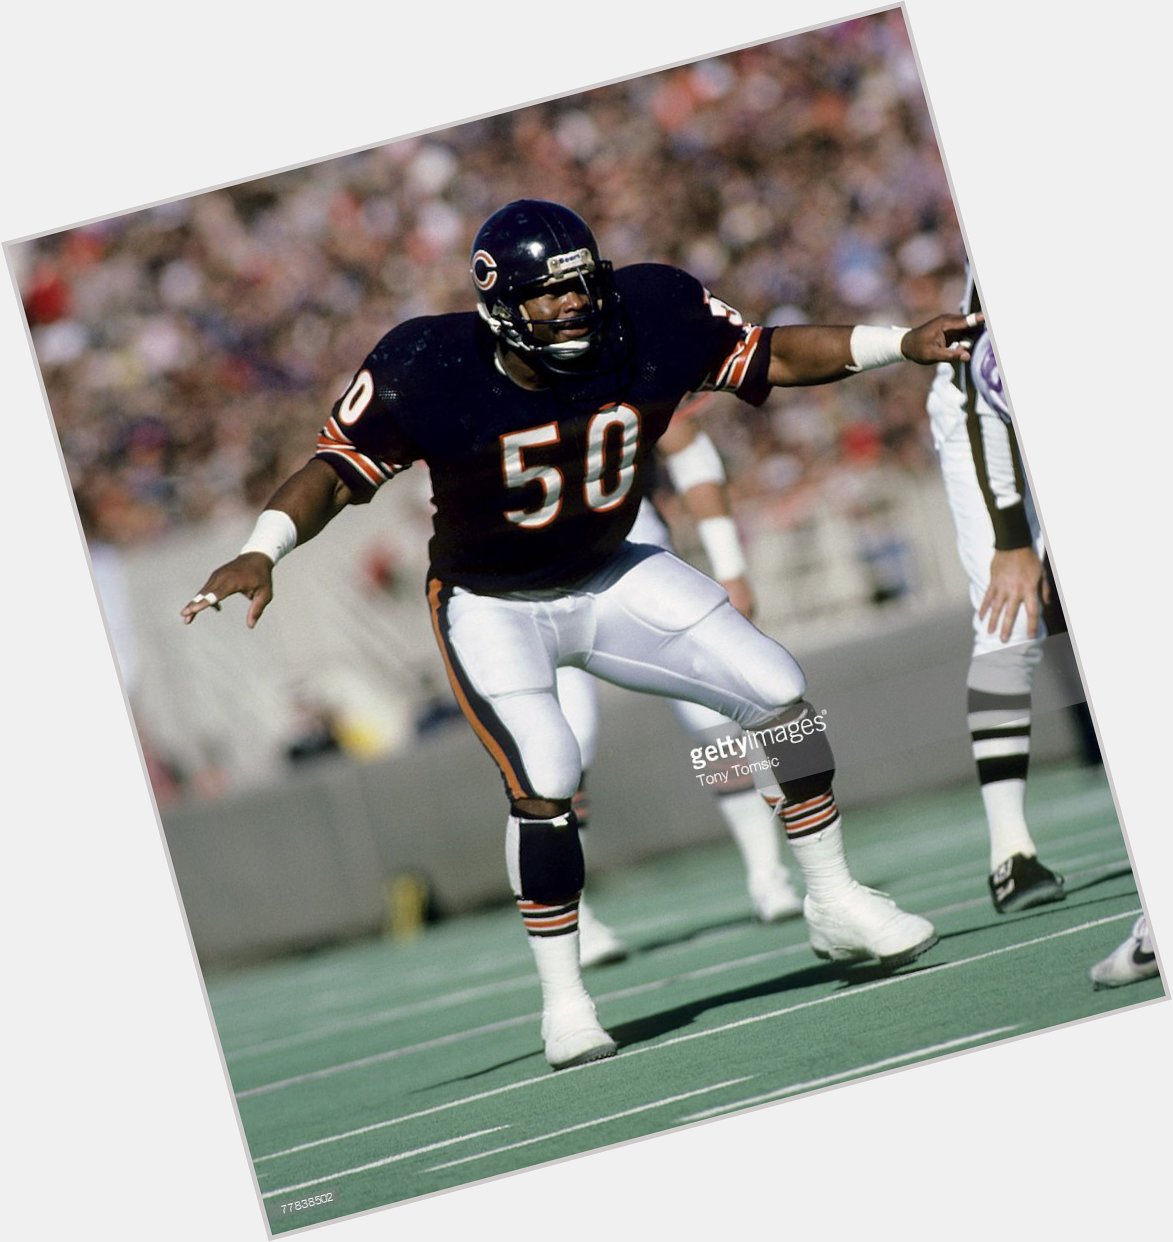 Happy Birthday to Mike Singletary who turns 59 today! 